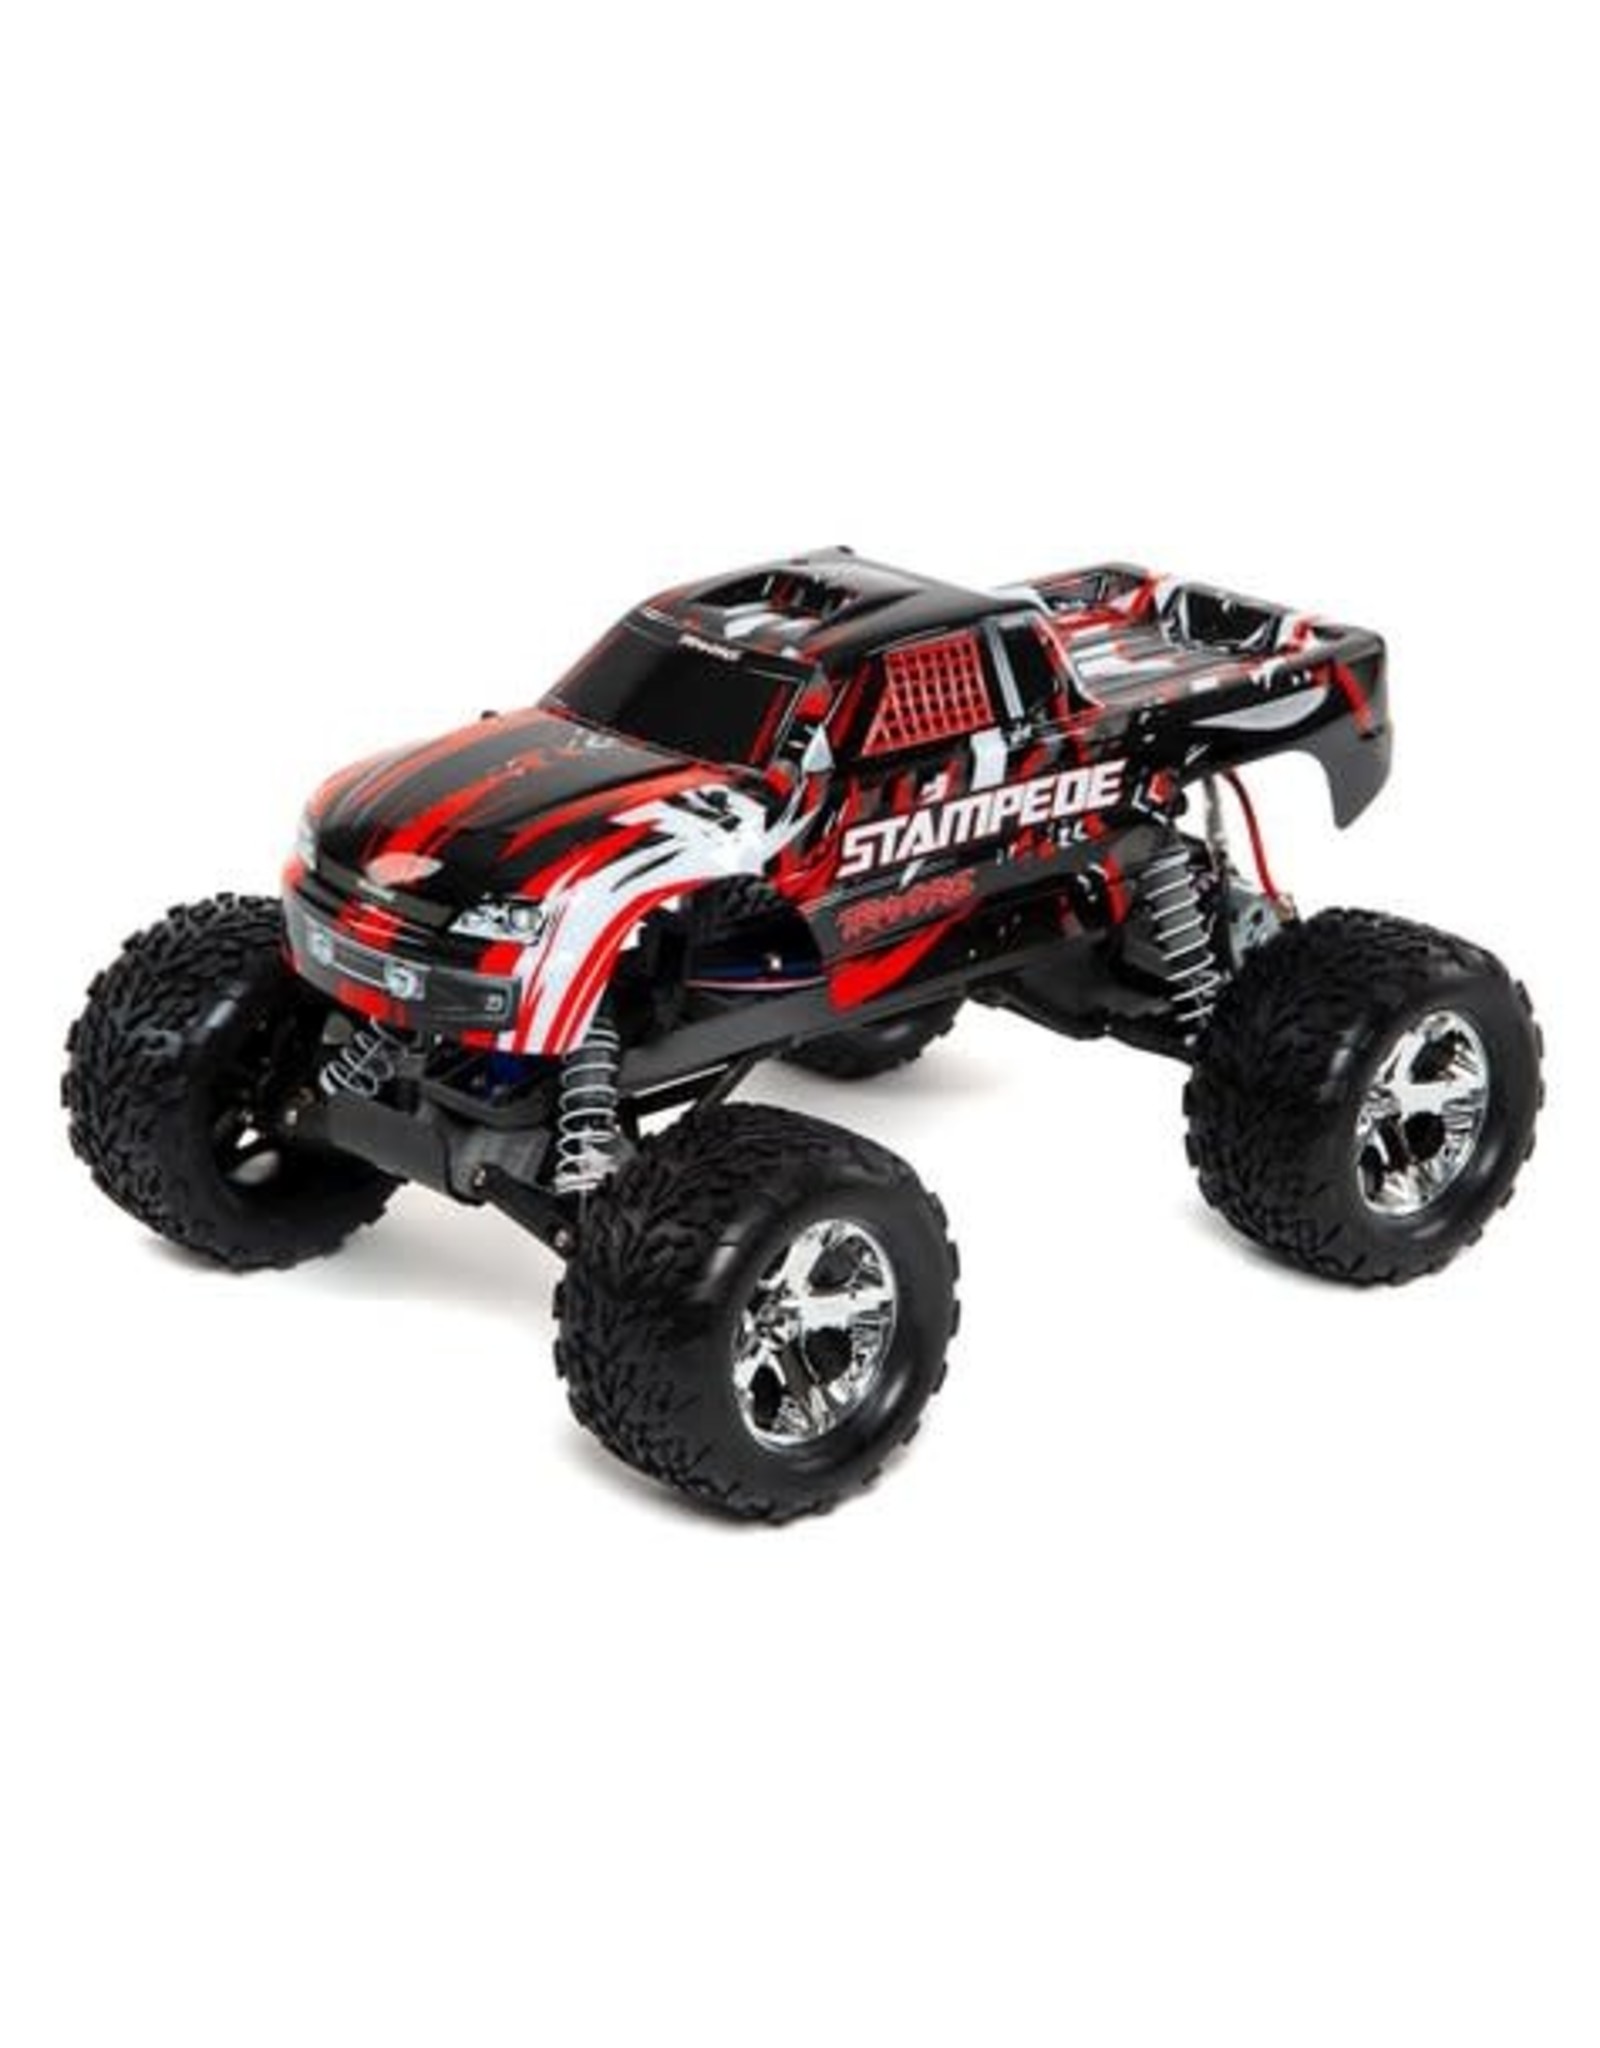 Traxxas Stampede 2wd 1/10 scale RED(No Battery Or charger)